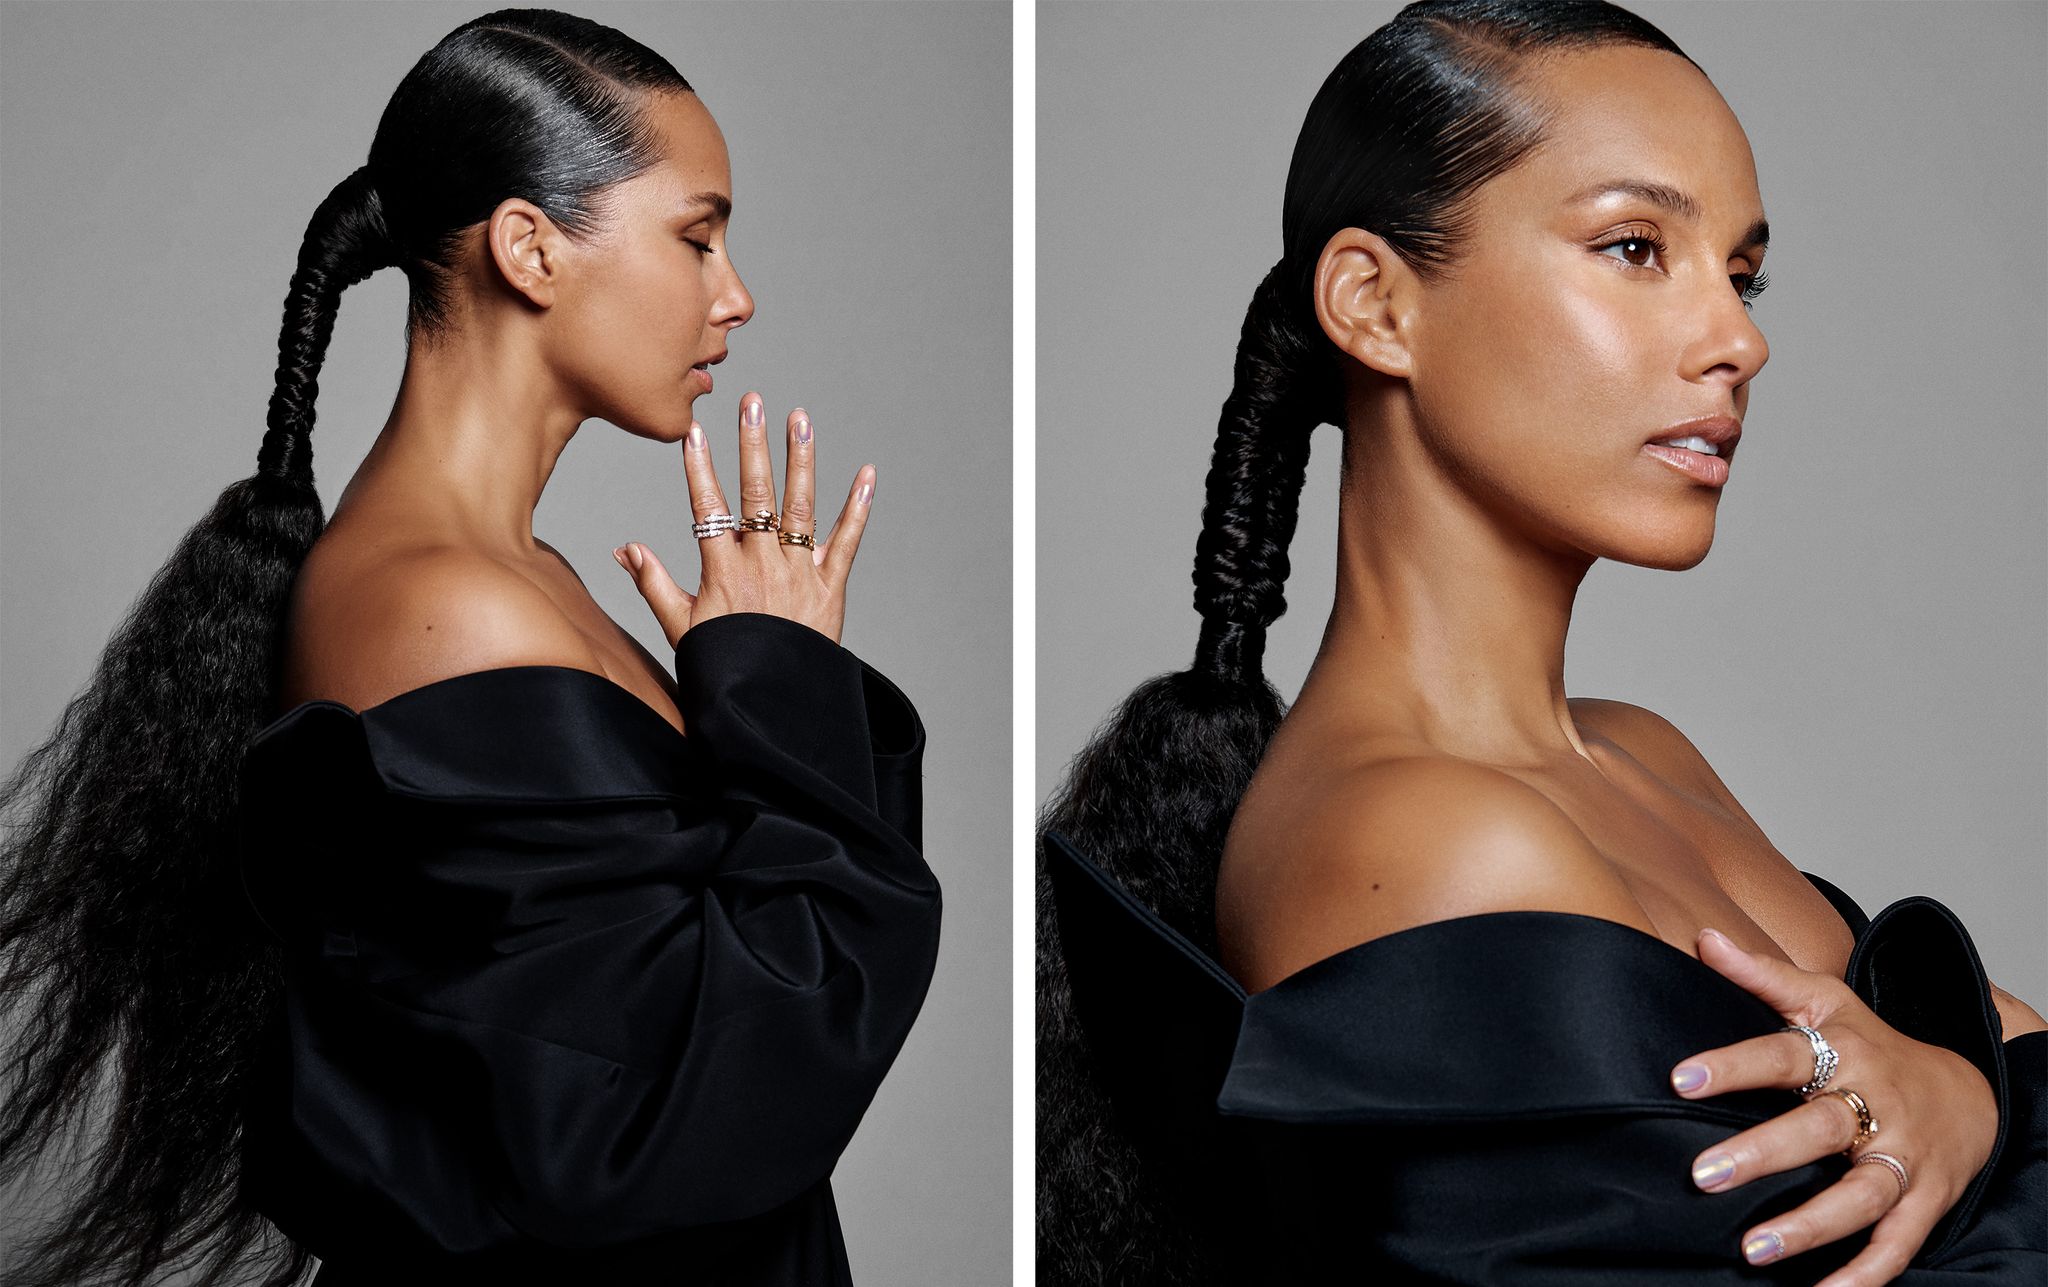 Alicia Keys for Marie Claire